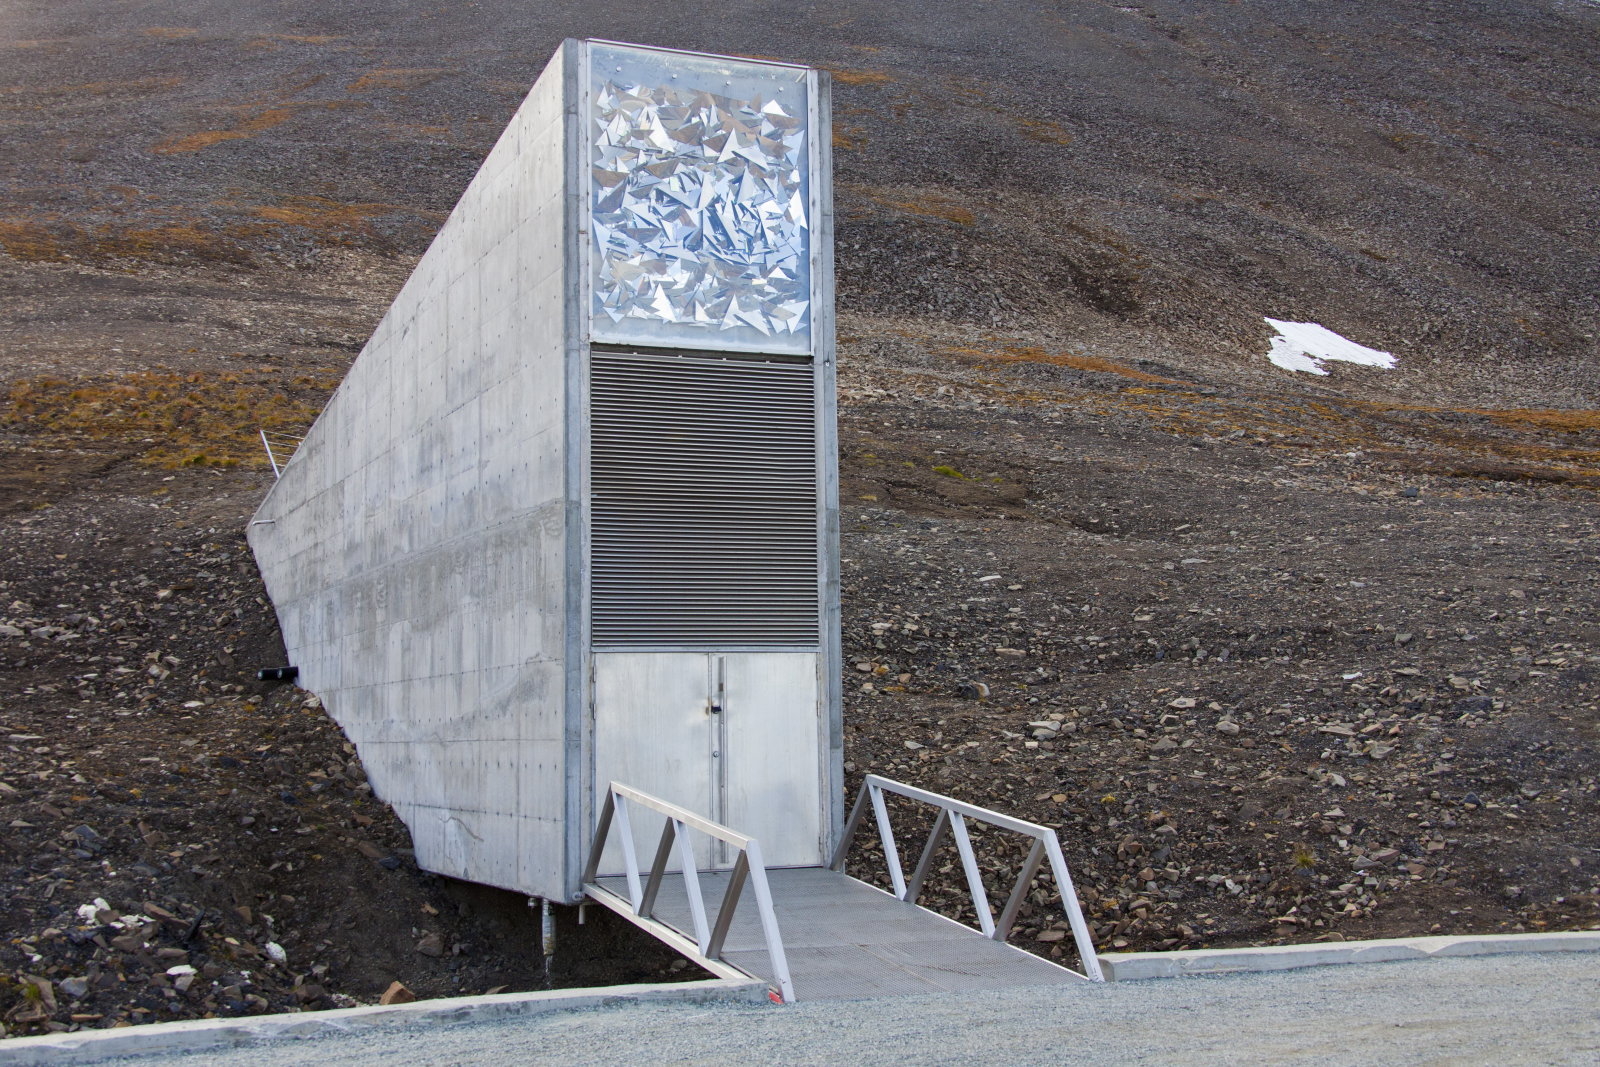 Doomsday seed vault upgrade protects against a warming Arctic | DeviceDaily.com